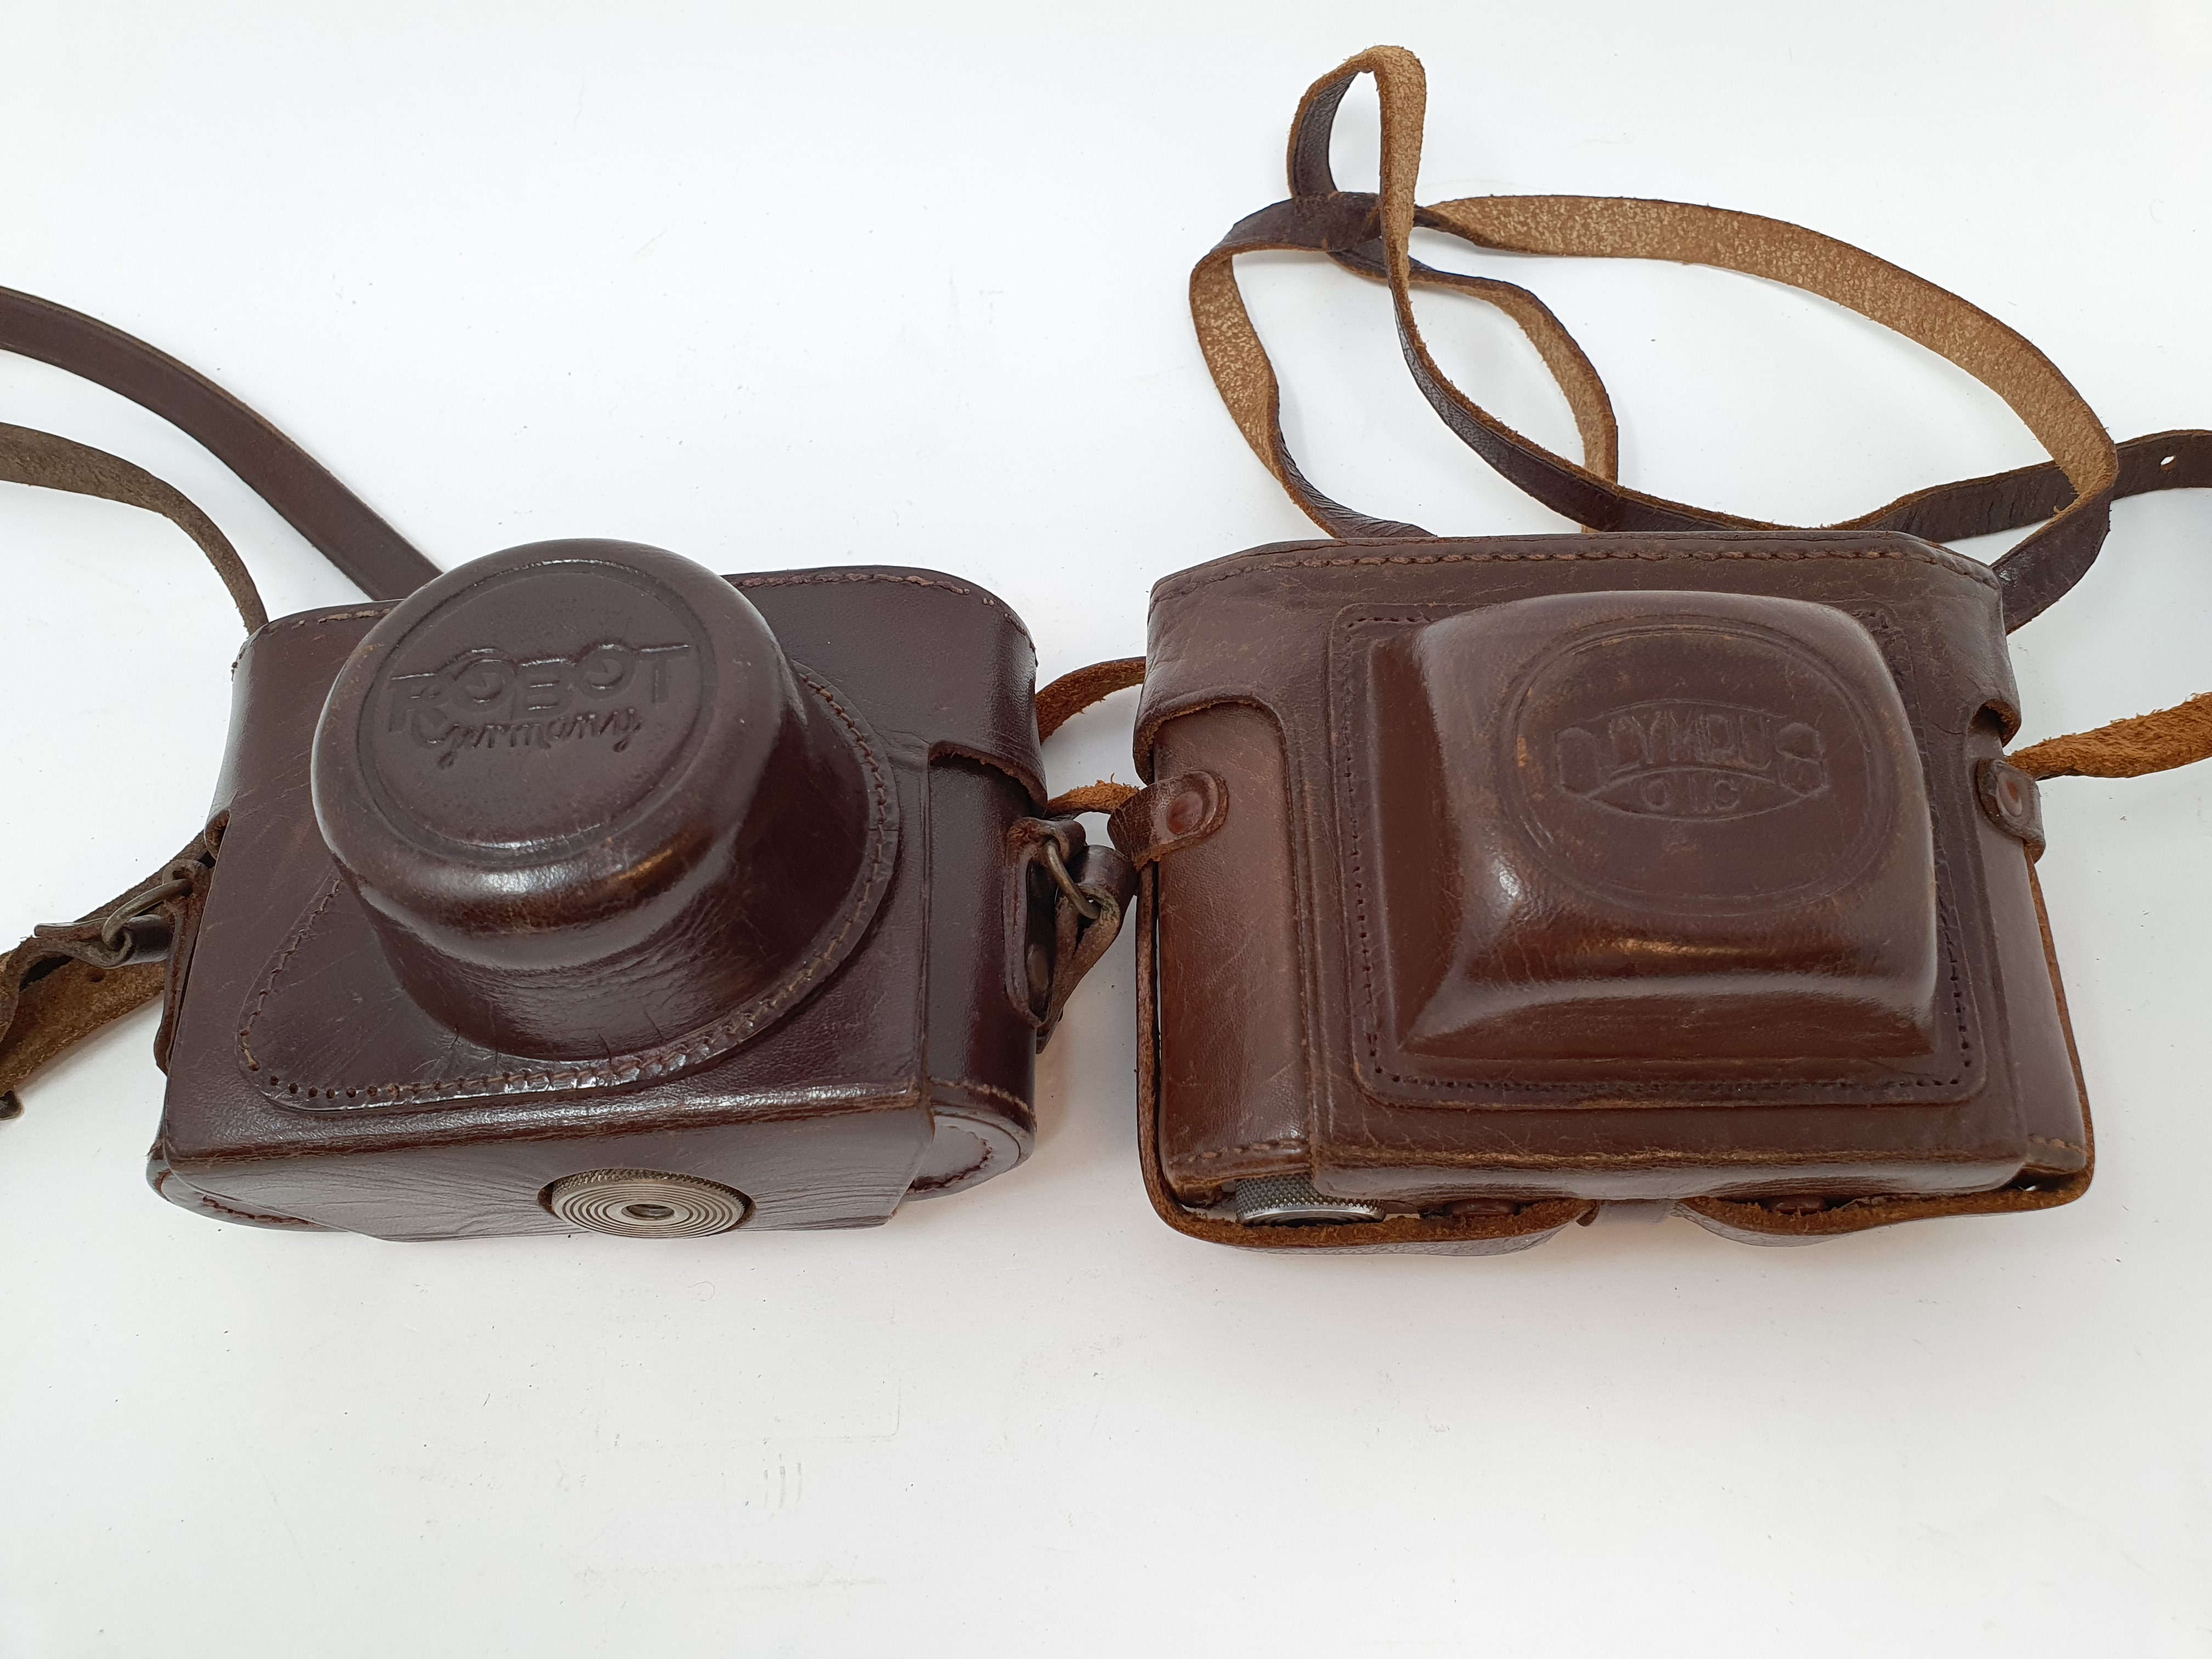 An Olympus 35 camera, serial number 28481, with outer leather case, and a Robot camera, with outer - Image 5 of 5